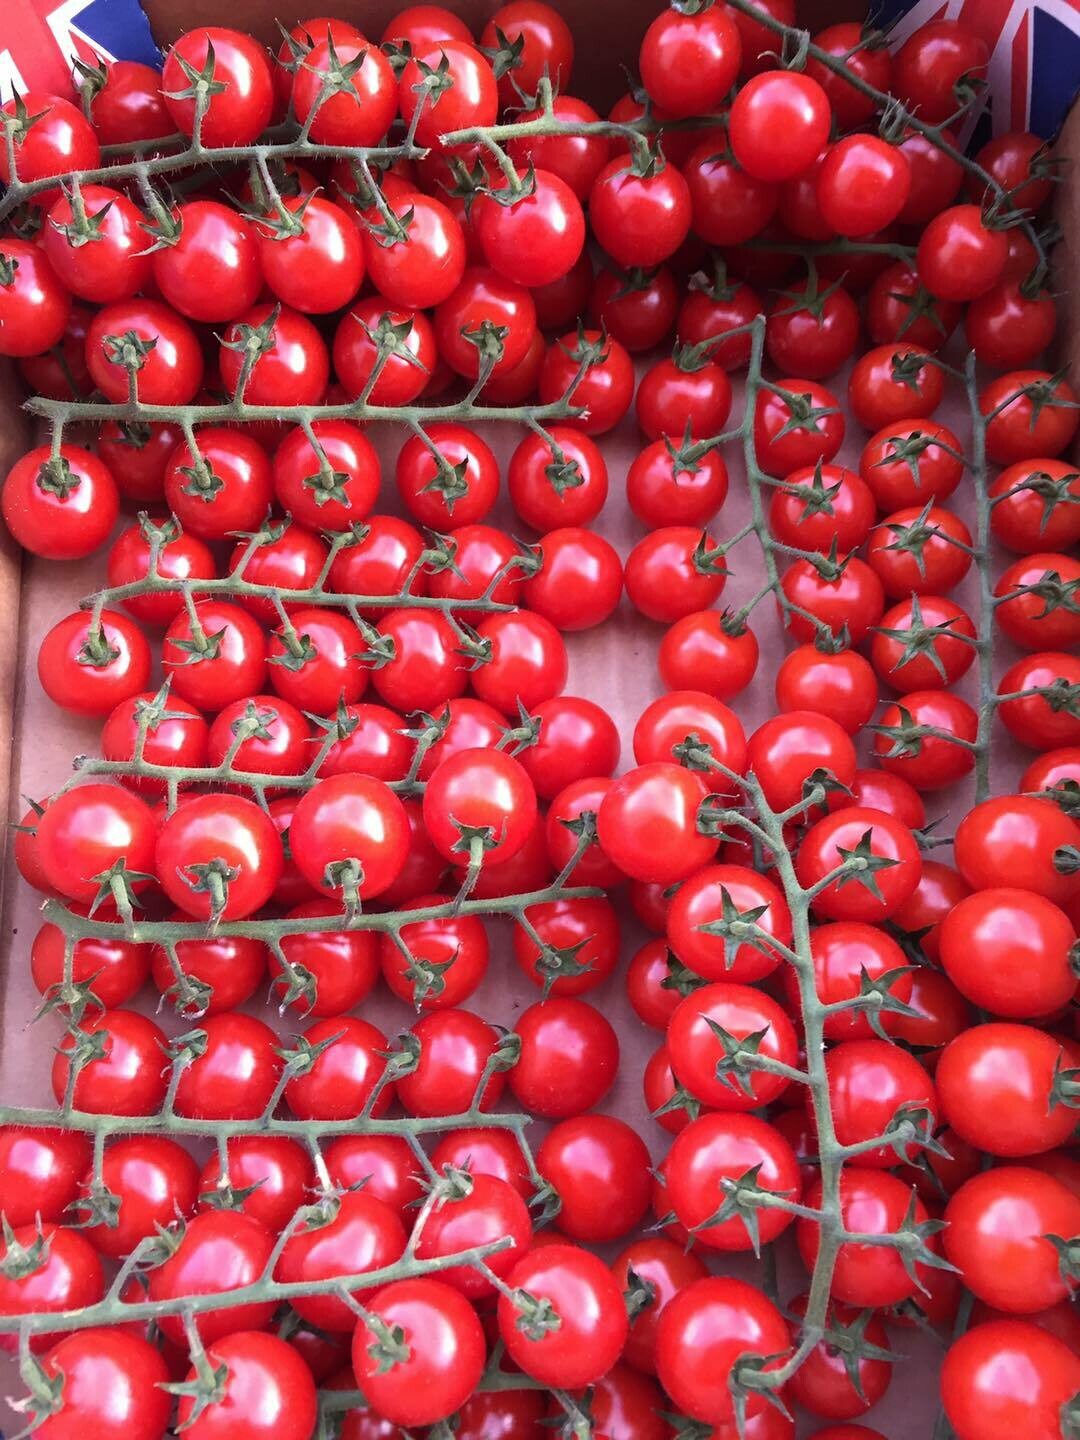 Tomatoes - Best Cherry Tomatoes on the Vine